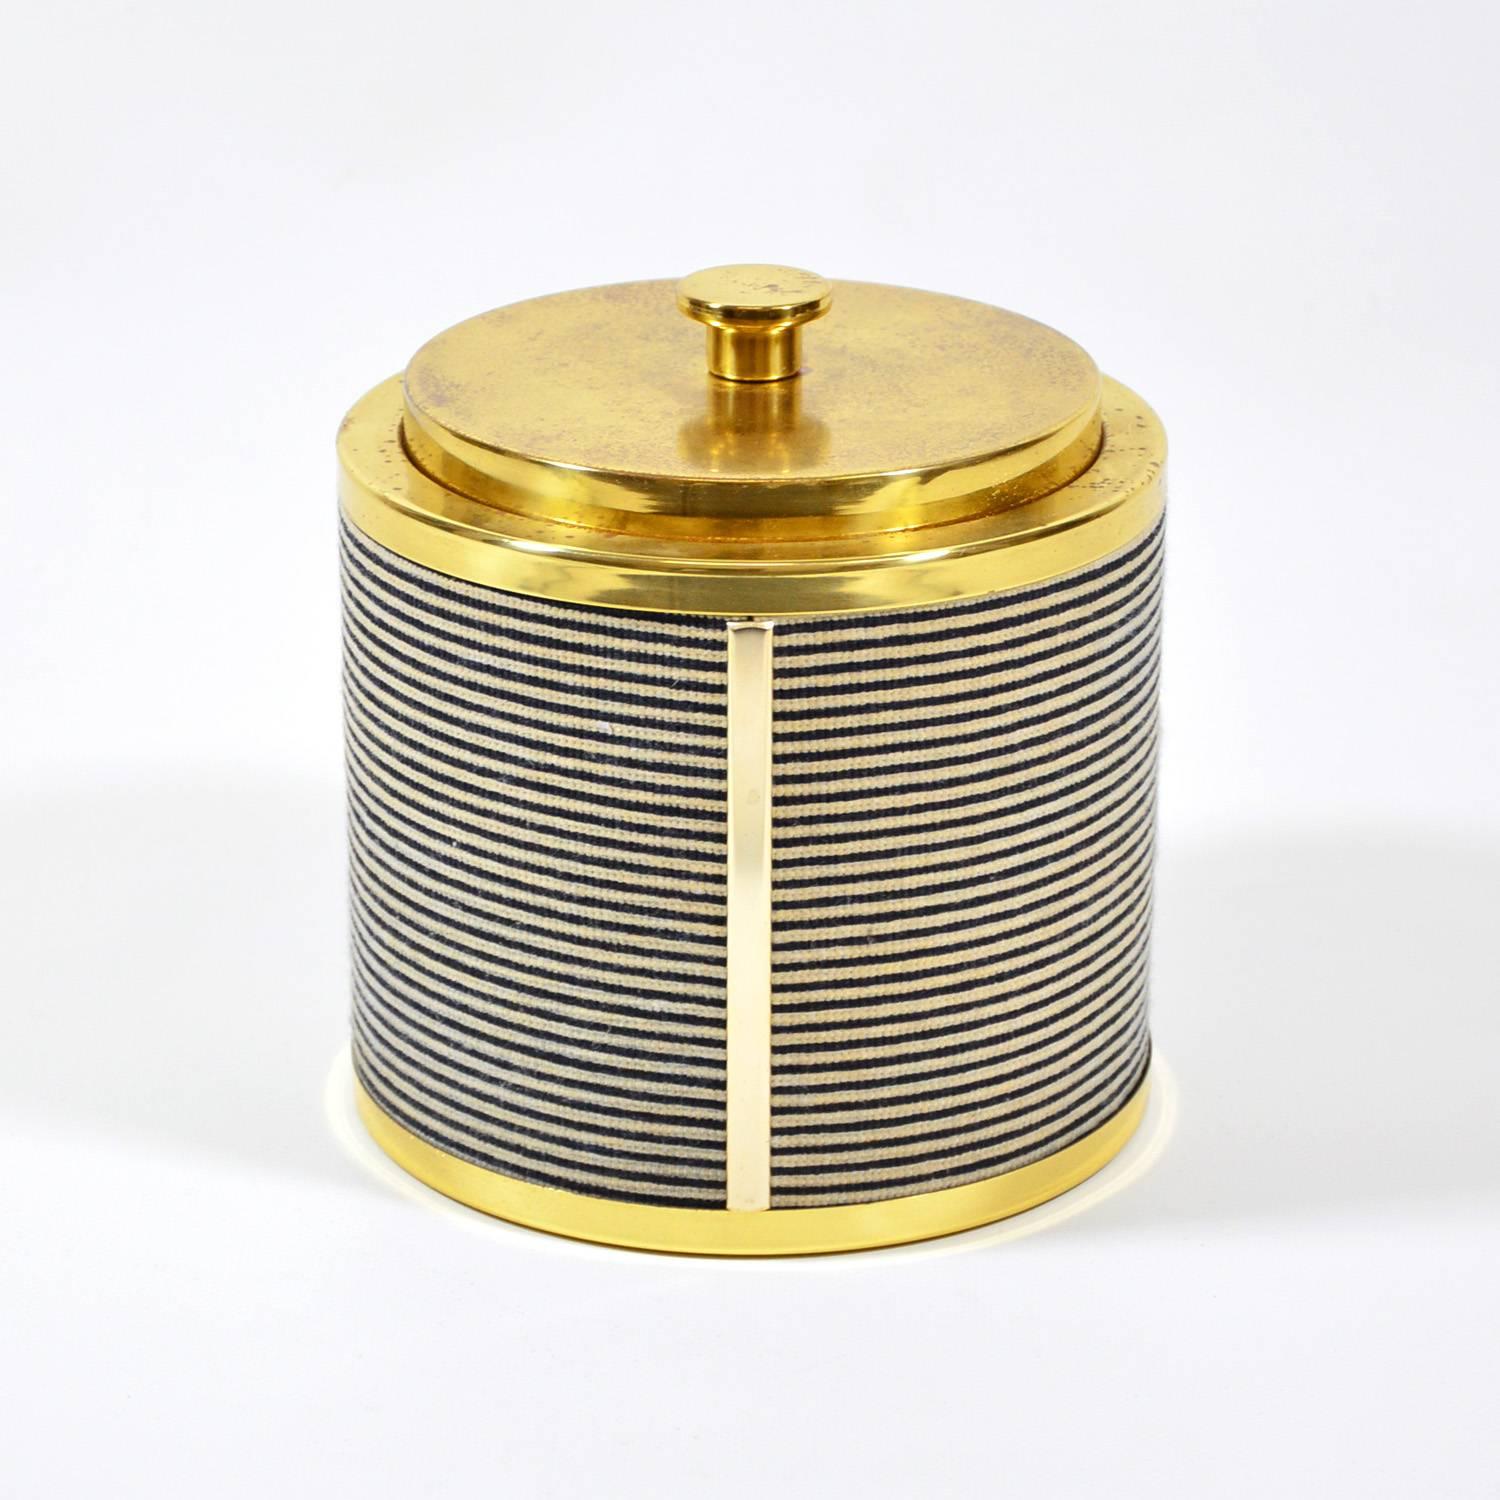 Modern Italian Vintage Ice Bucket in Brass and Fabric by Rinnovel, Possibly Sottsass